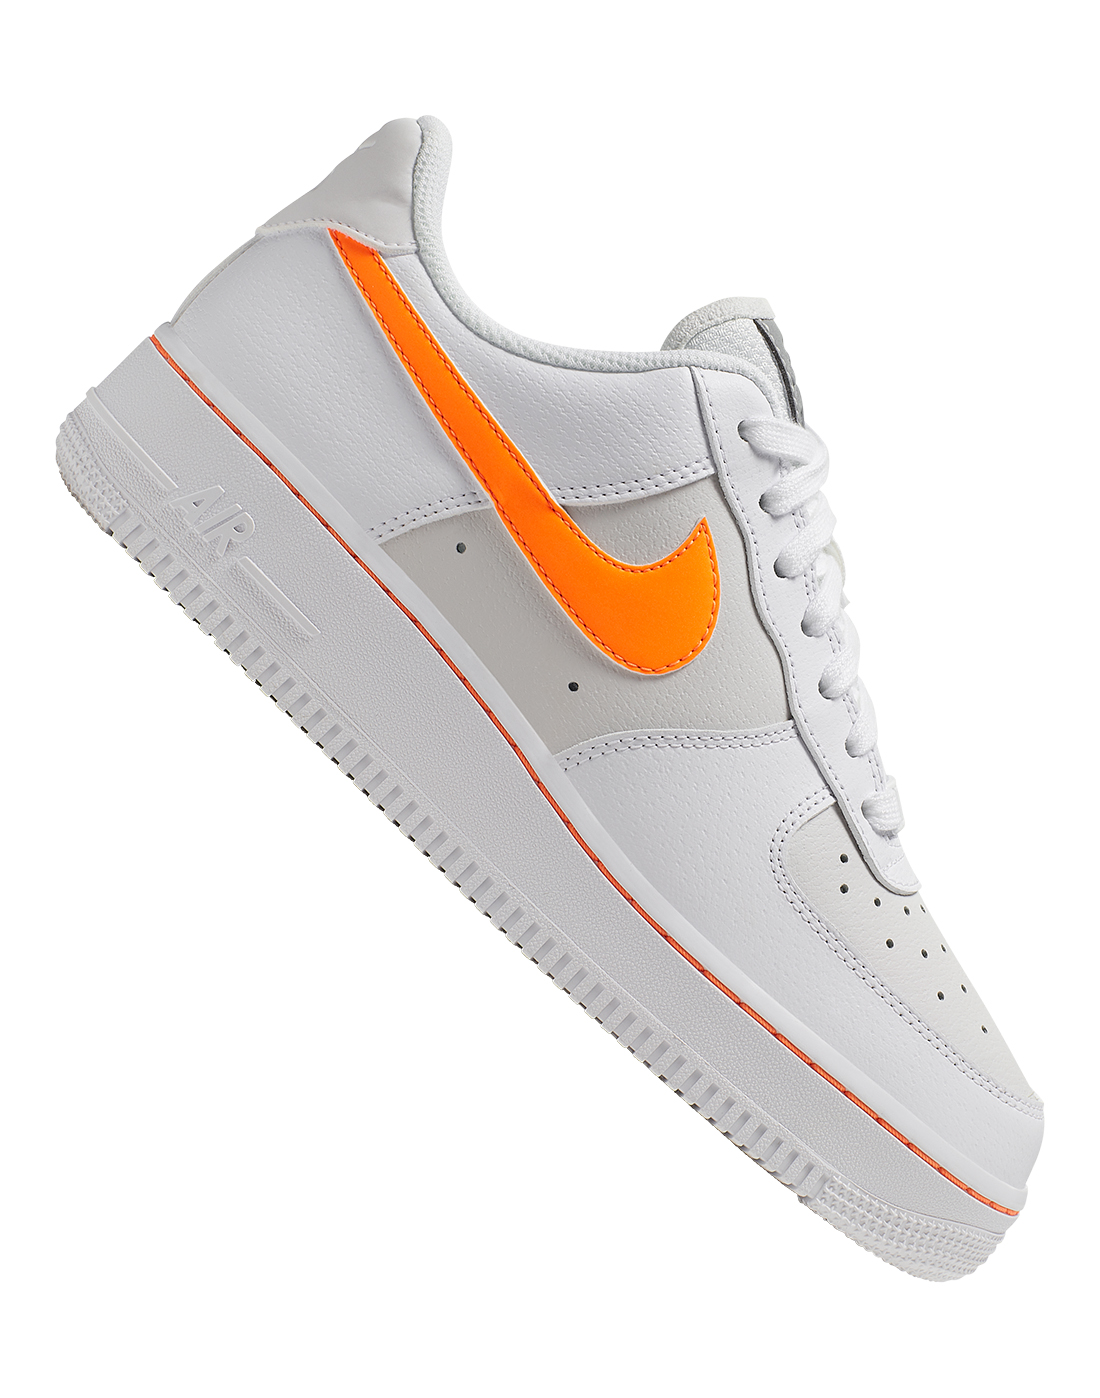 air force with orange tick